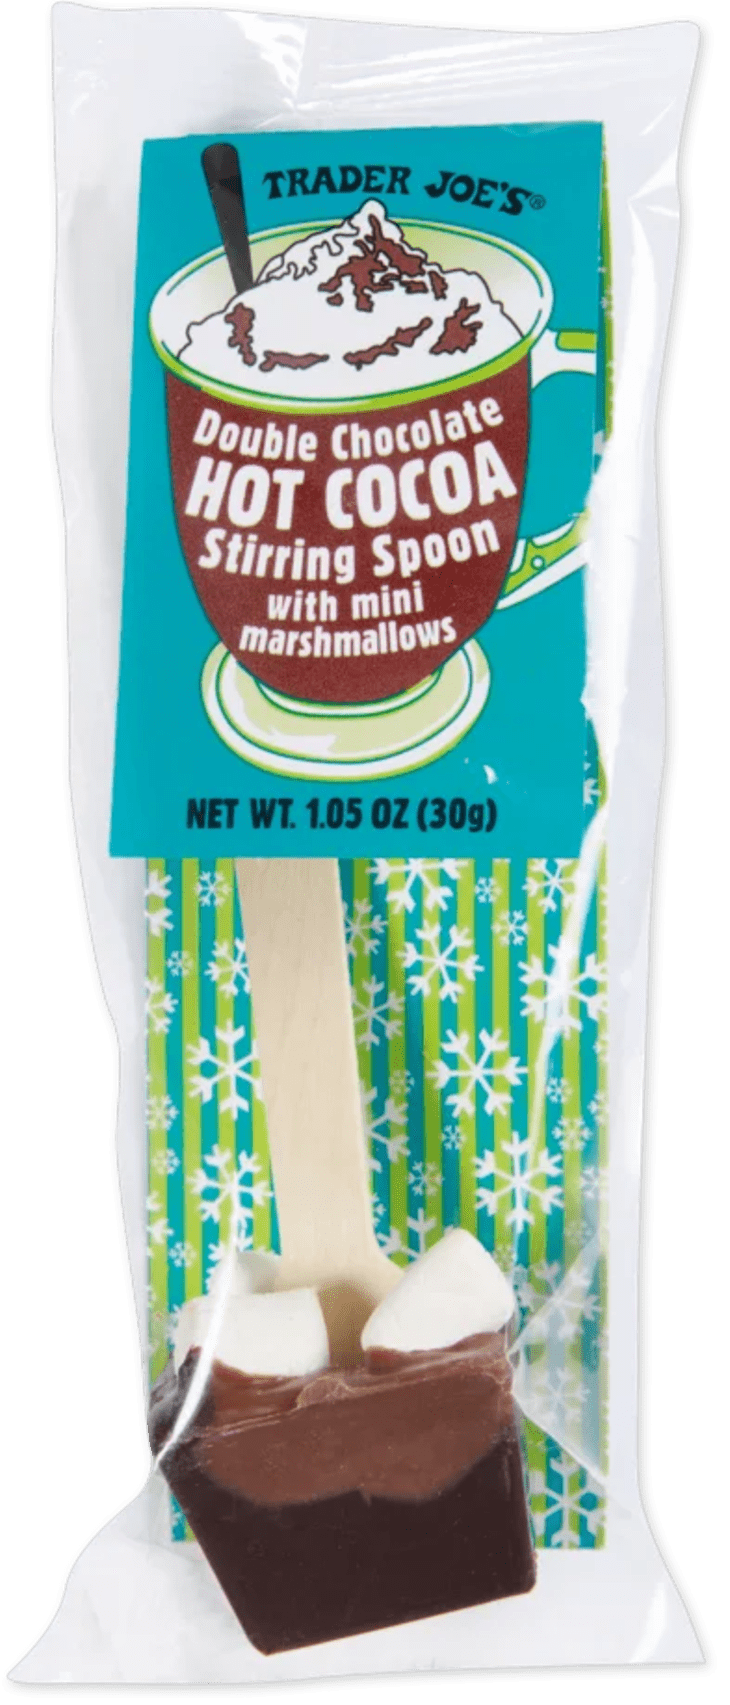 Double Chocolate Hot Cocoa Stirring Spoon at Trader Joe's